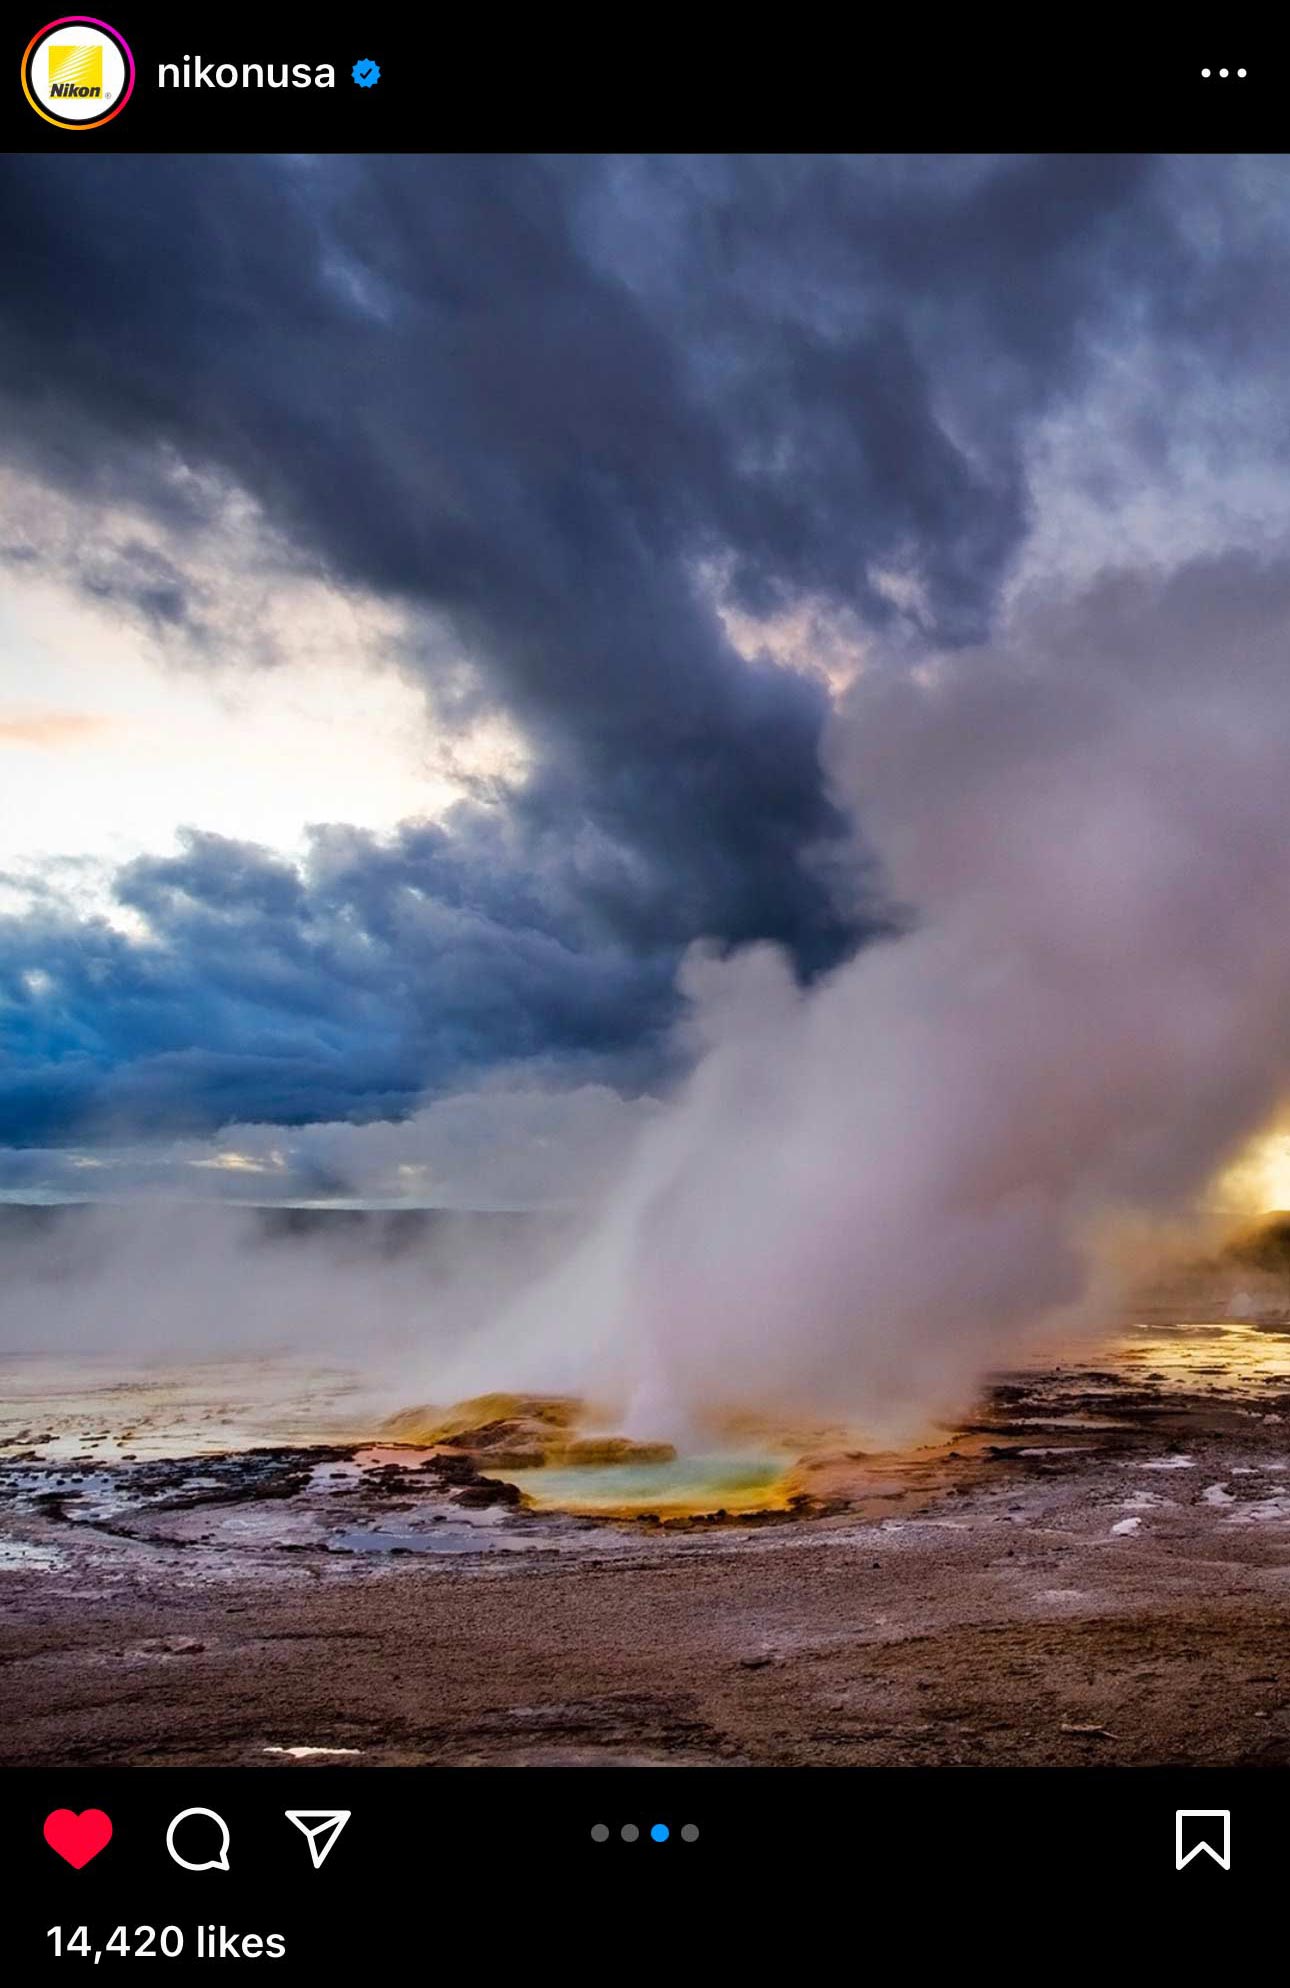 Steaming geyser under a dramatic sky shared by Nikon.